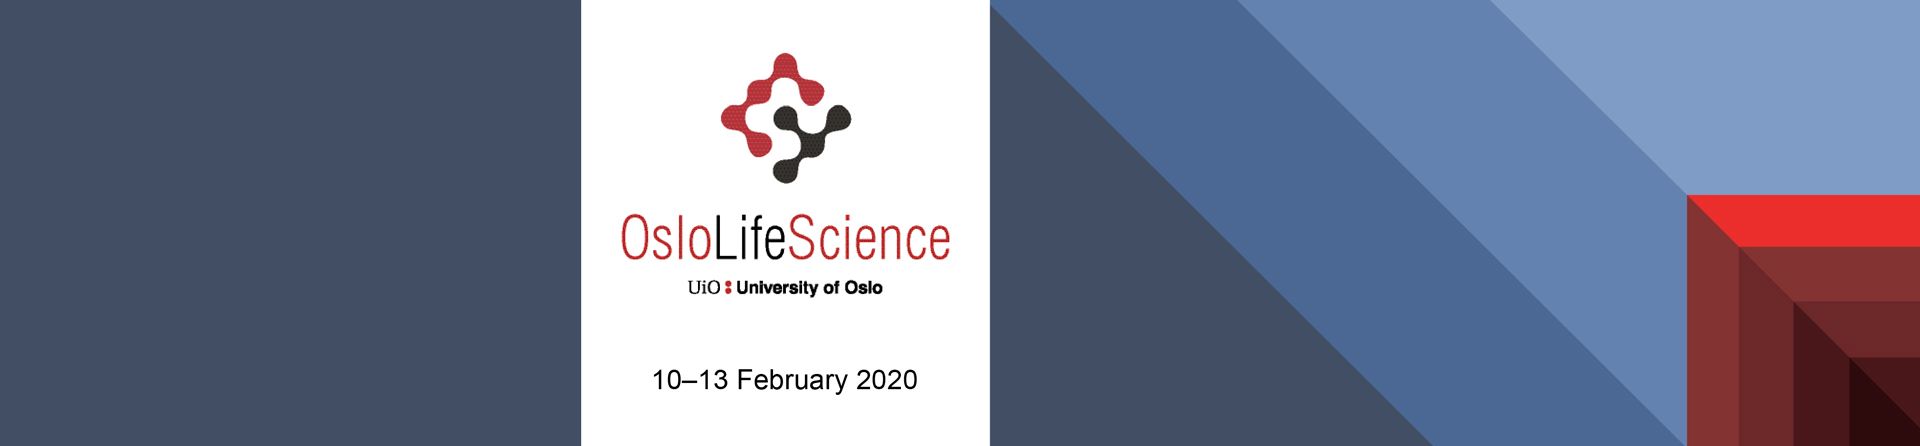 Banner Oslo Life Science 2020